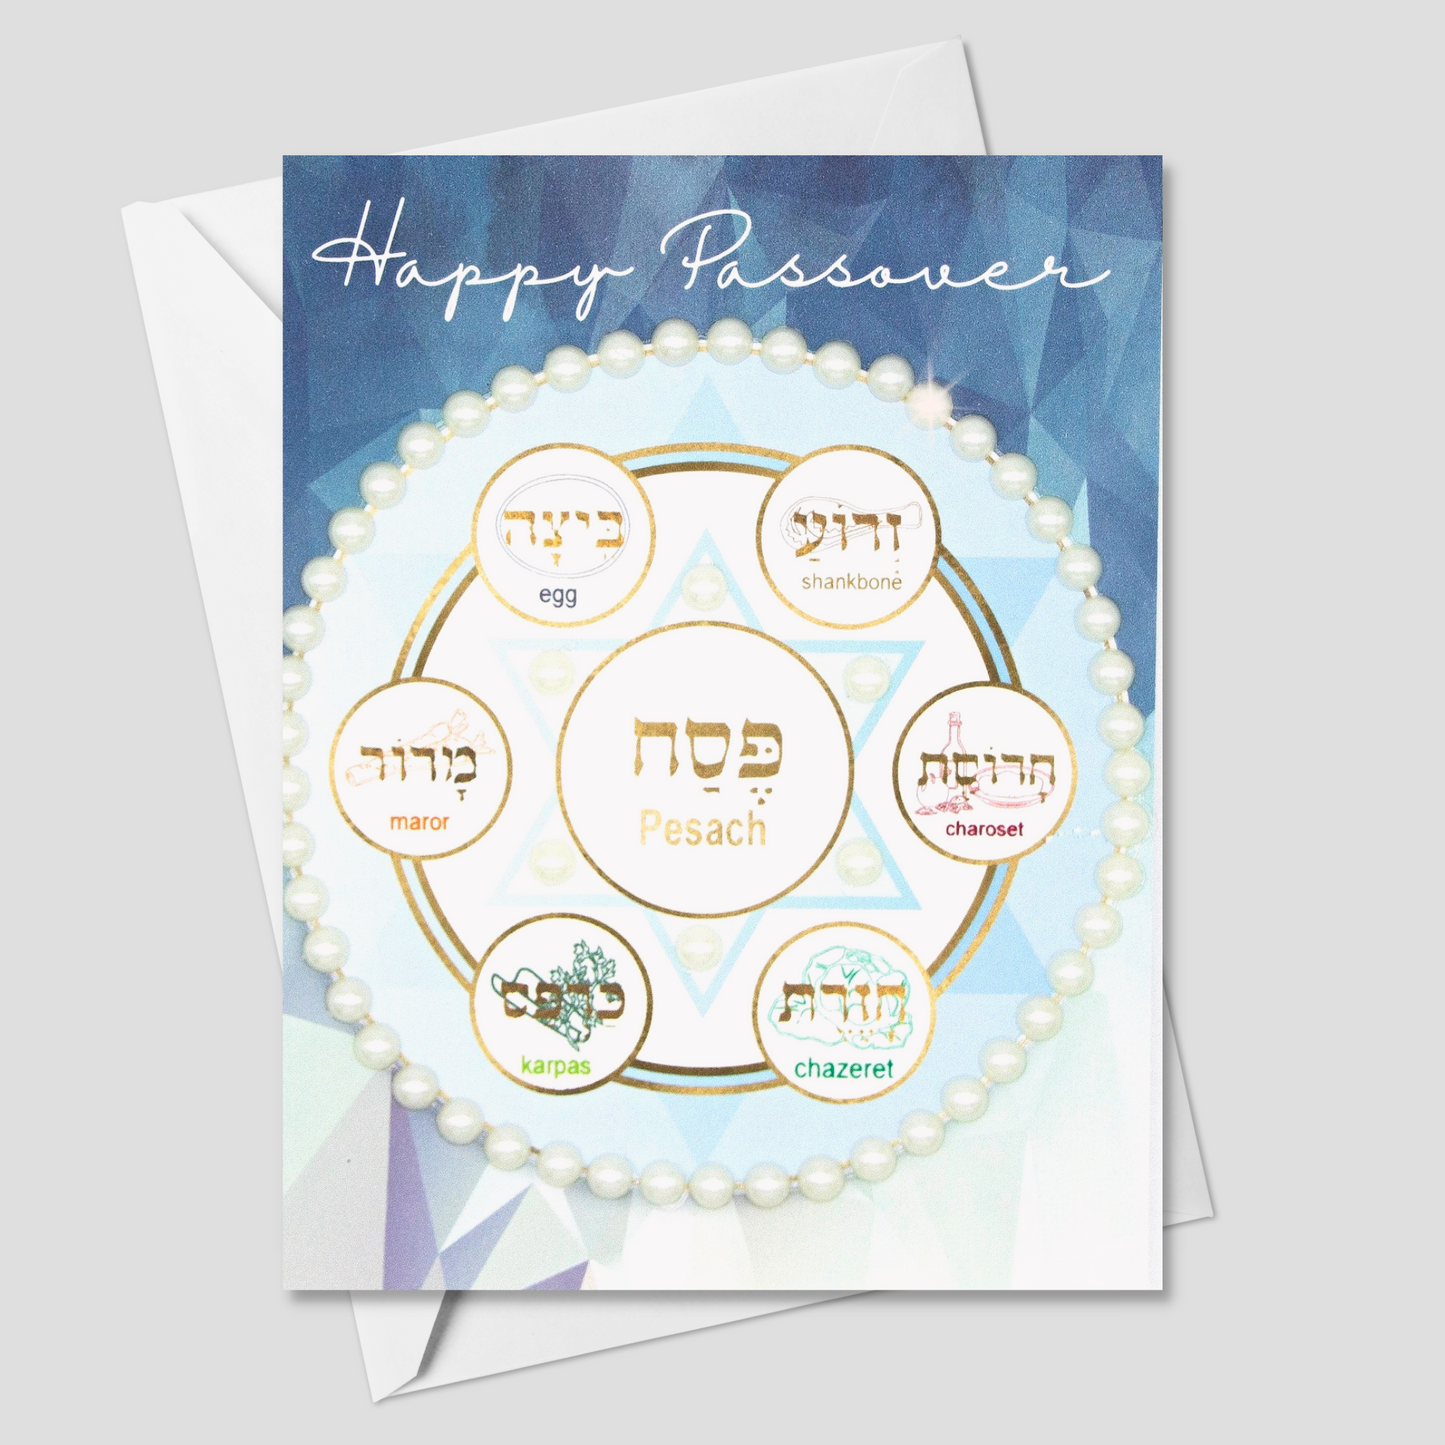 Happy Passover (Blue and White) Greeting Card